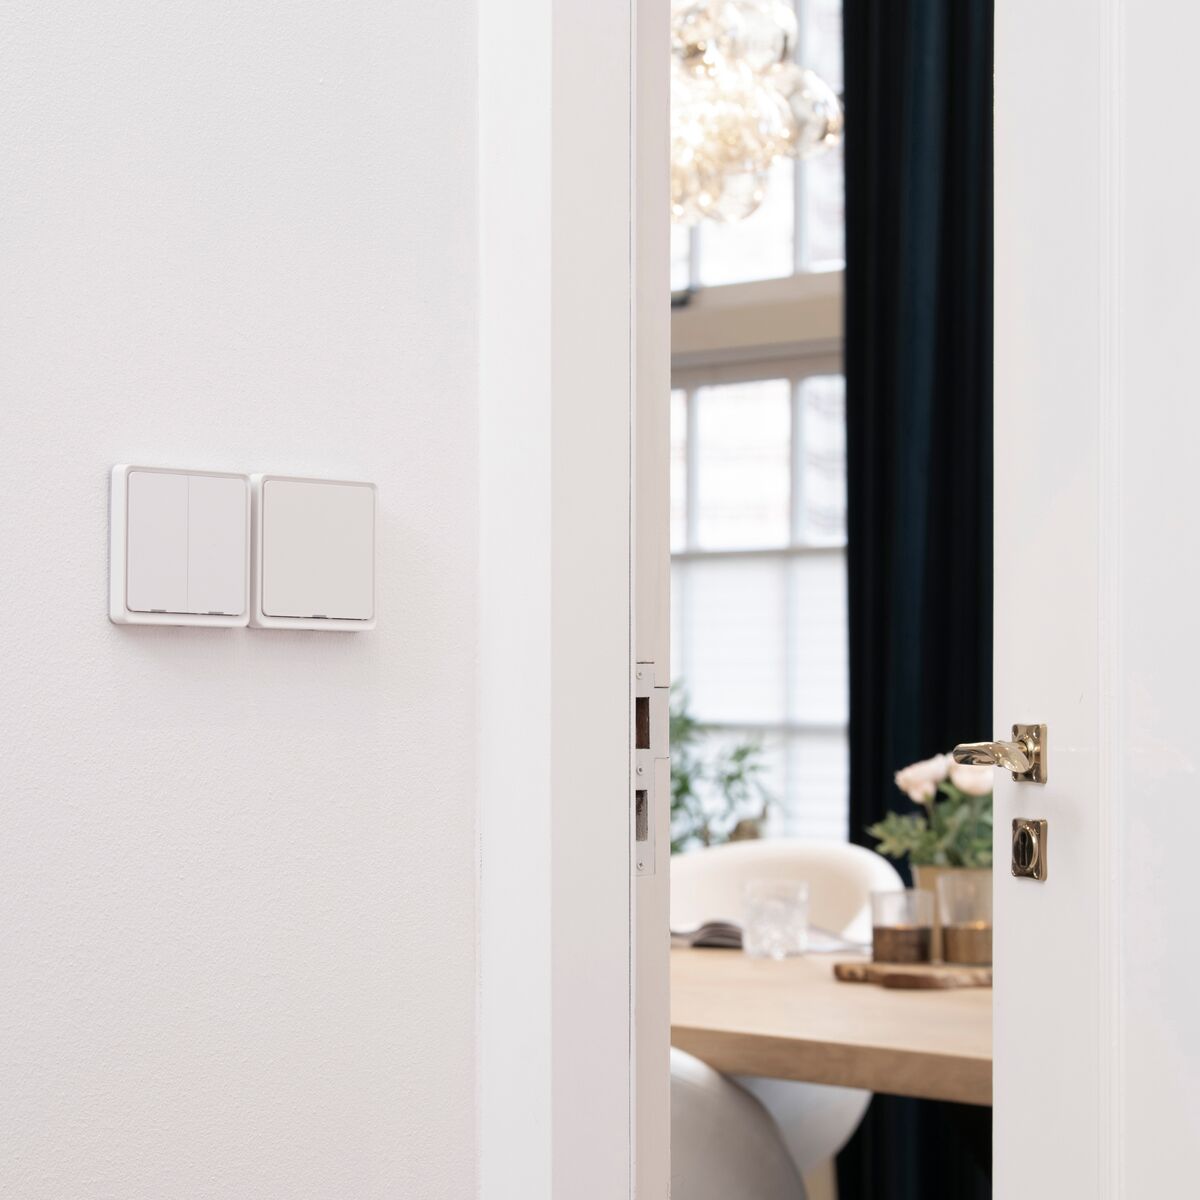 Push LE BLK - Zigbee switch - Ambiance Image of Push LE WHT and Push LO WHT mounted on wall | Marmitek